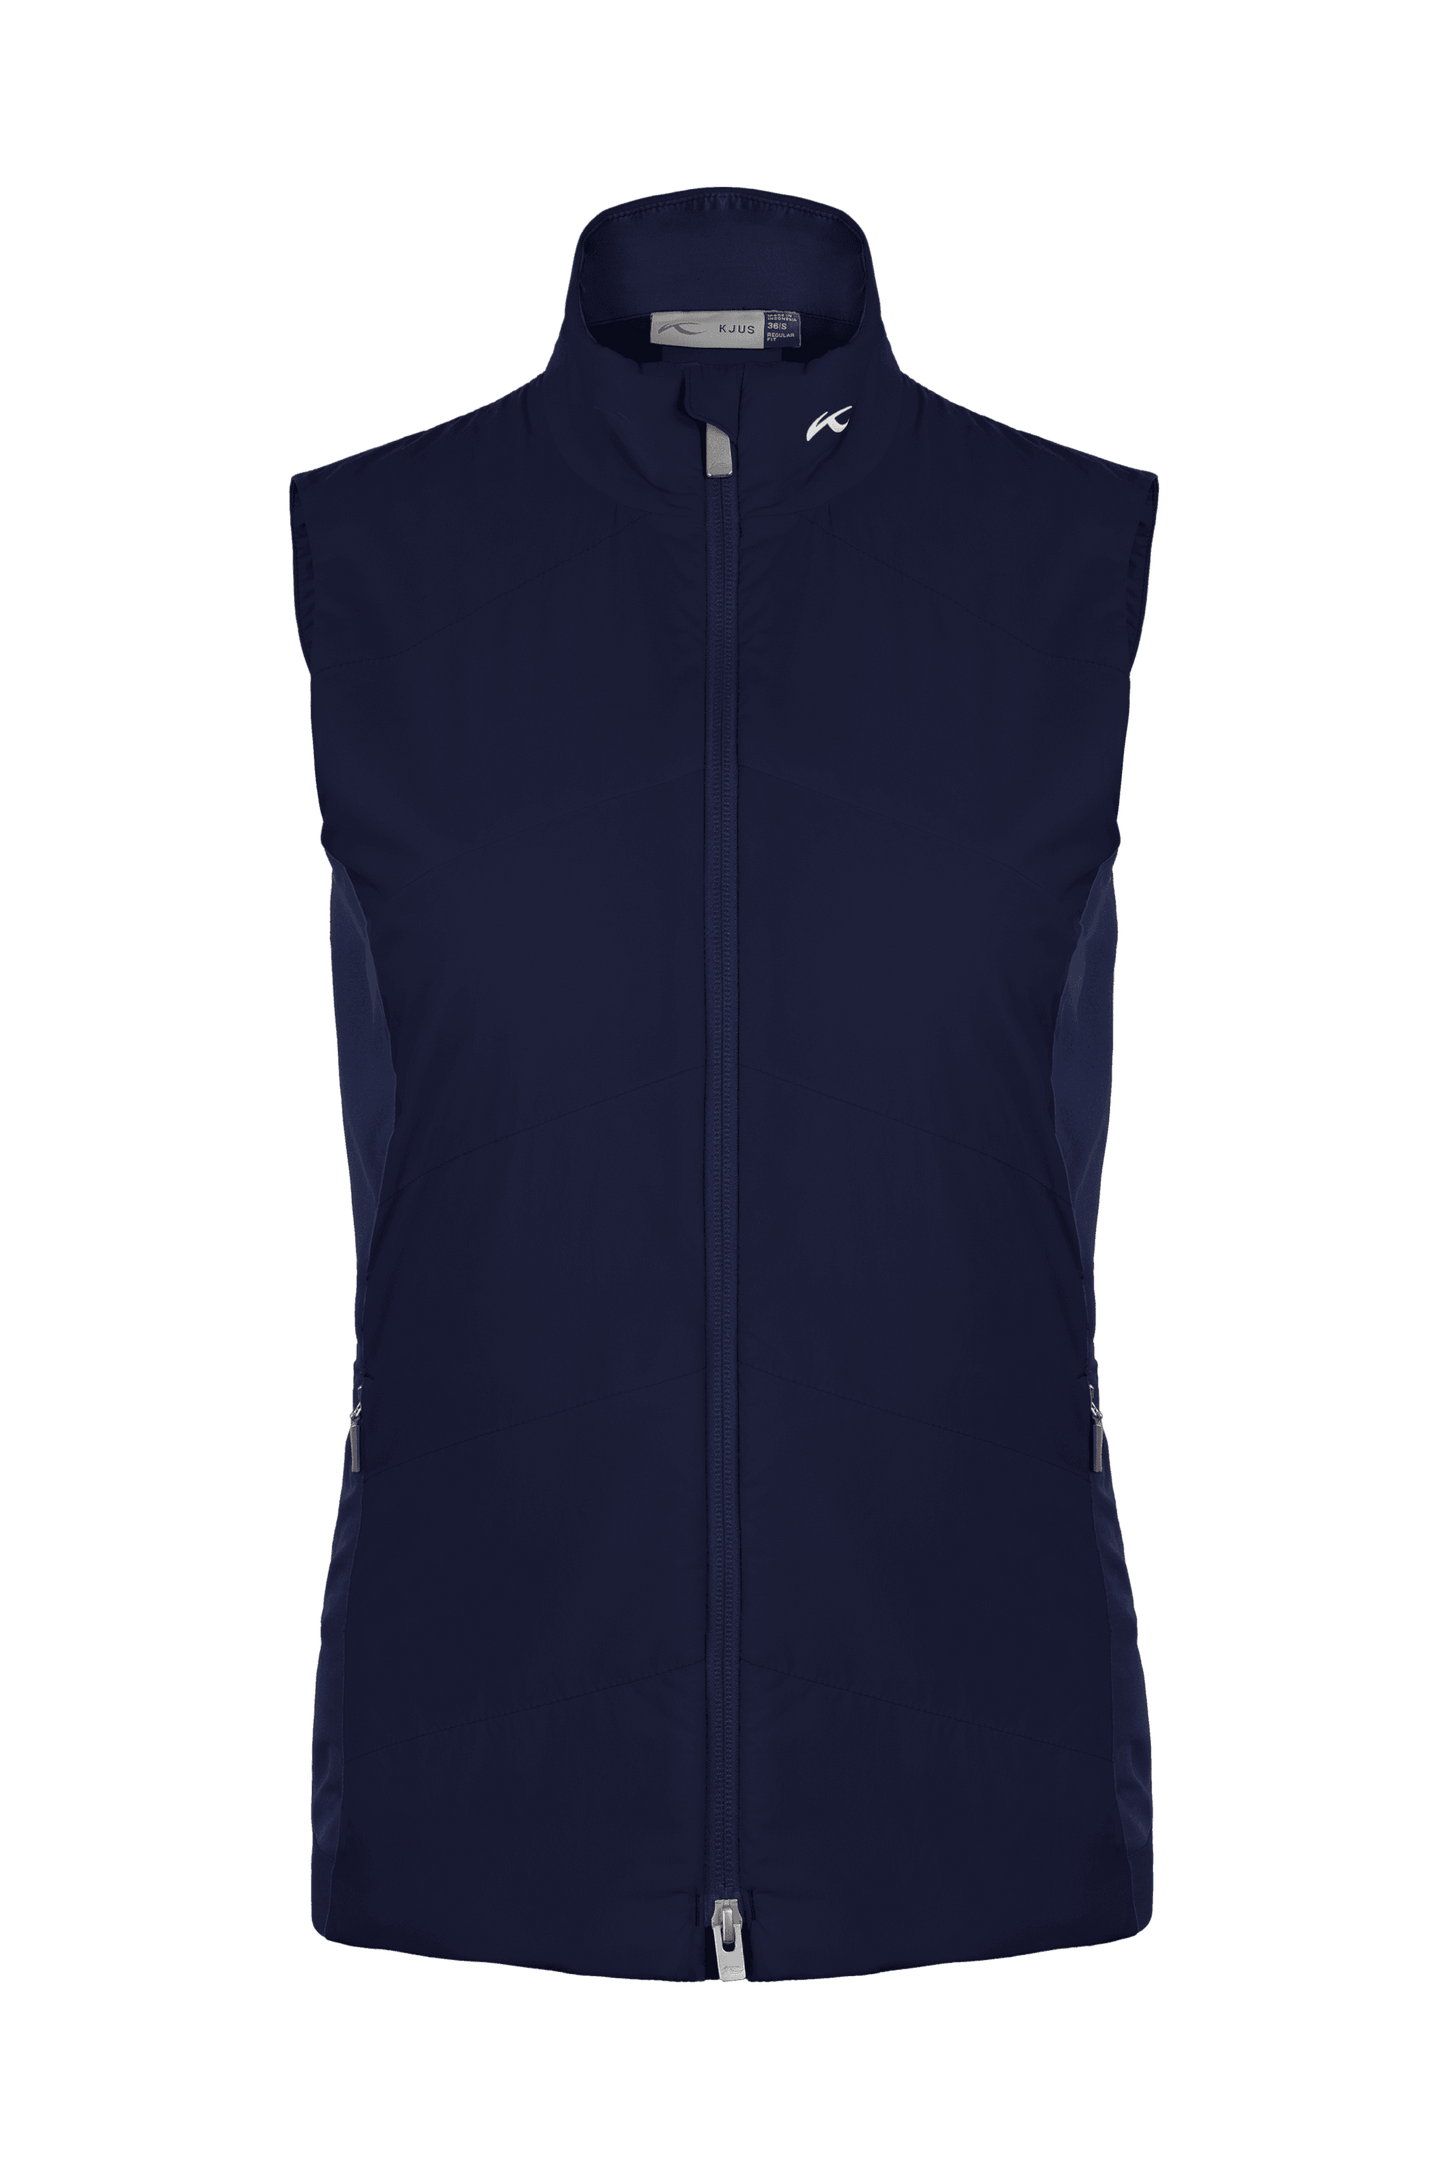 Women's Retention Gilet by Kjus - The Luxury Promotional Gifts Company Limited